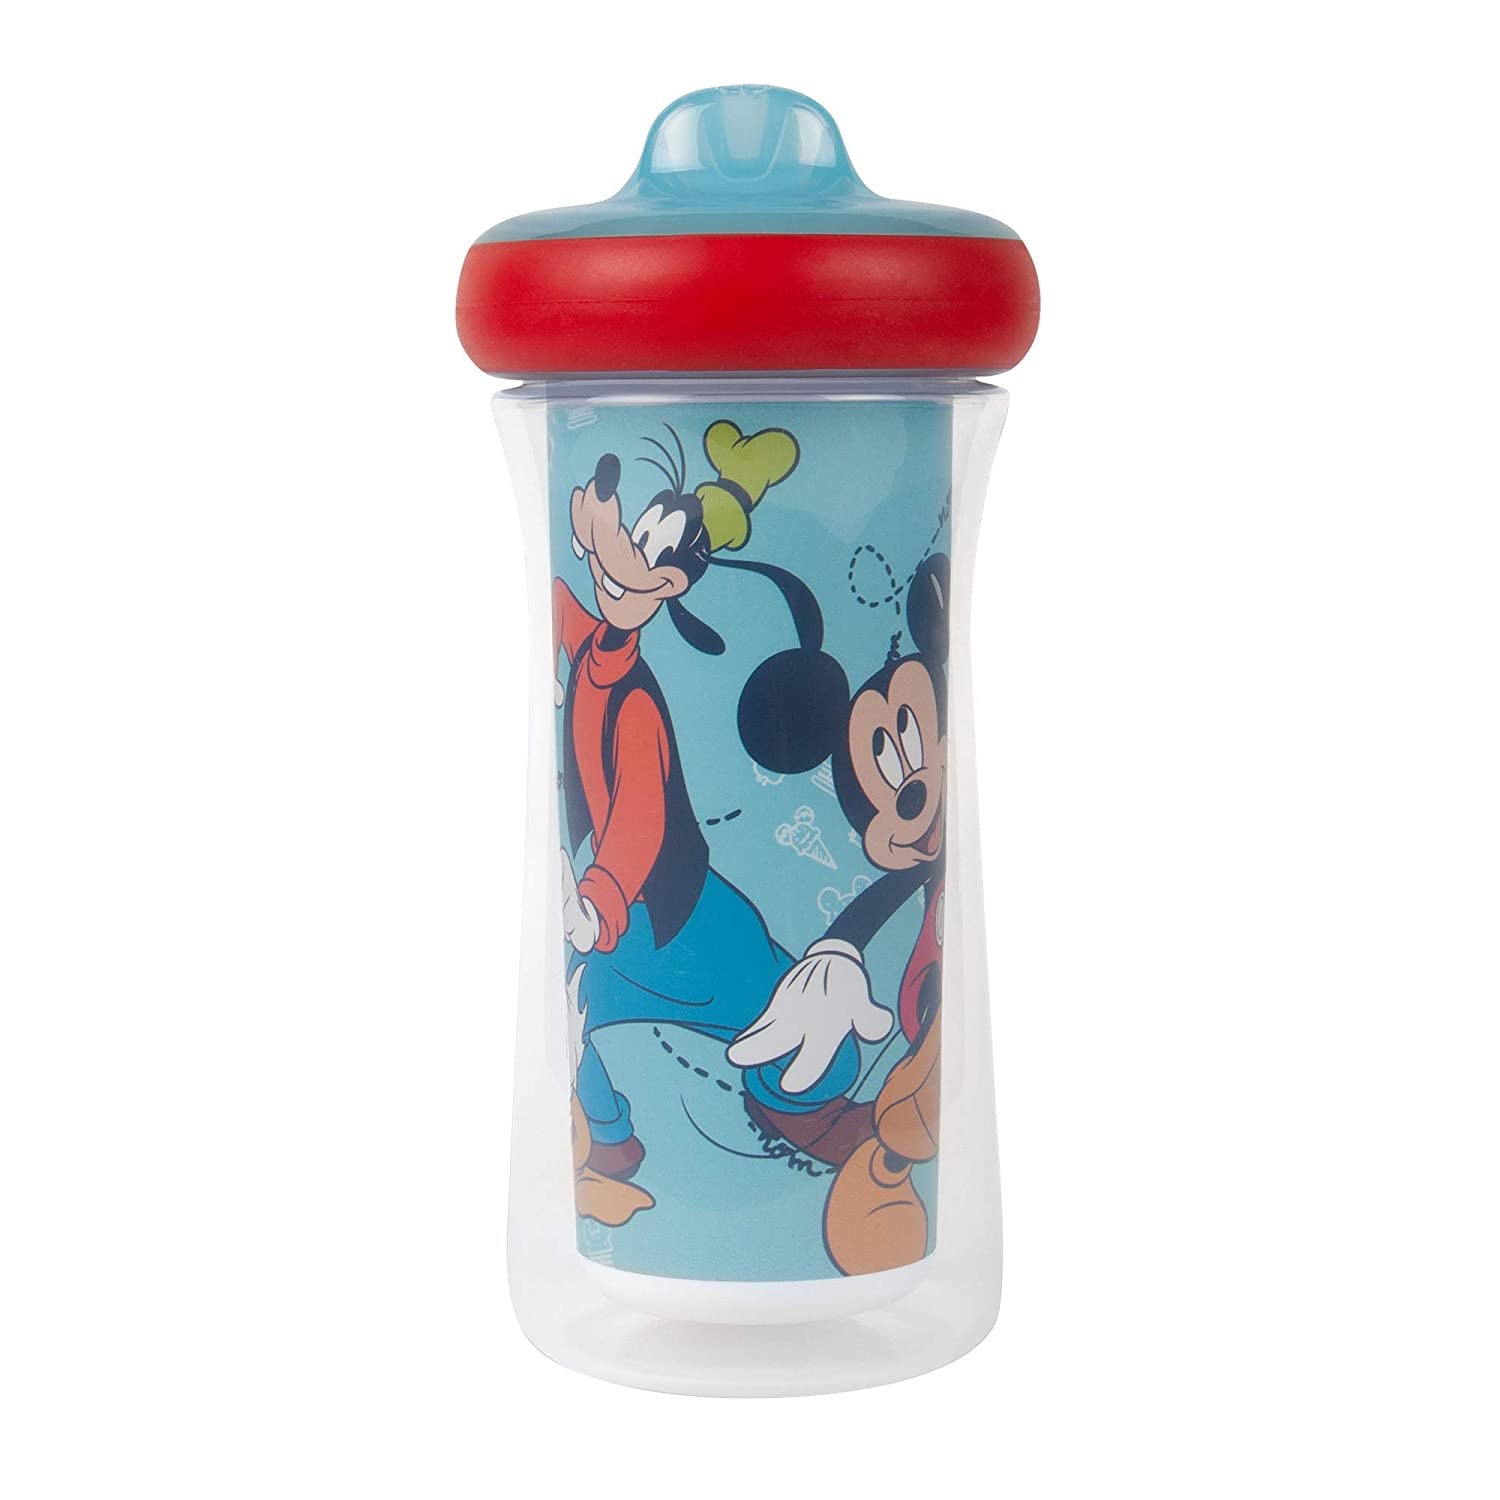 Disney Mickey Mouse Baby Boys' 2-Pack Sipper Cups